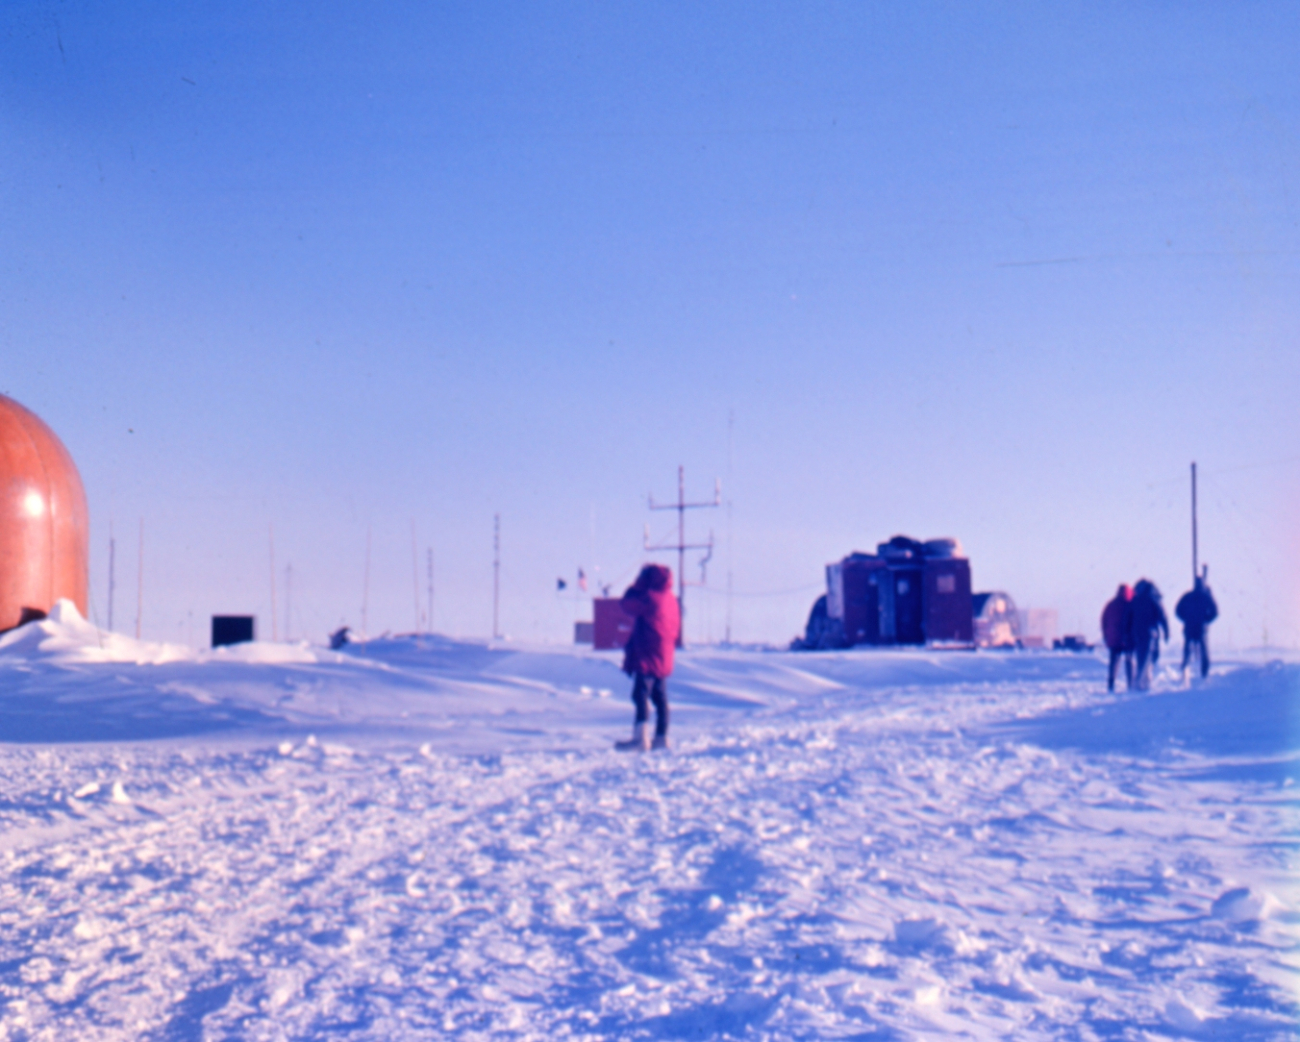 Main street of the South Pole Station